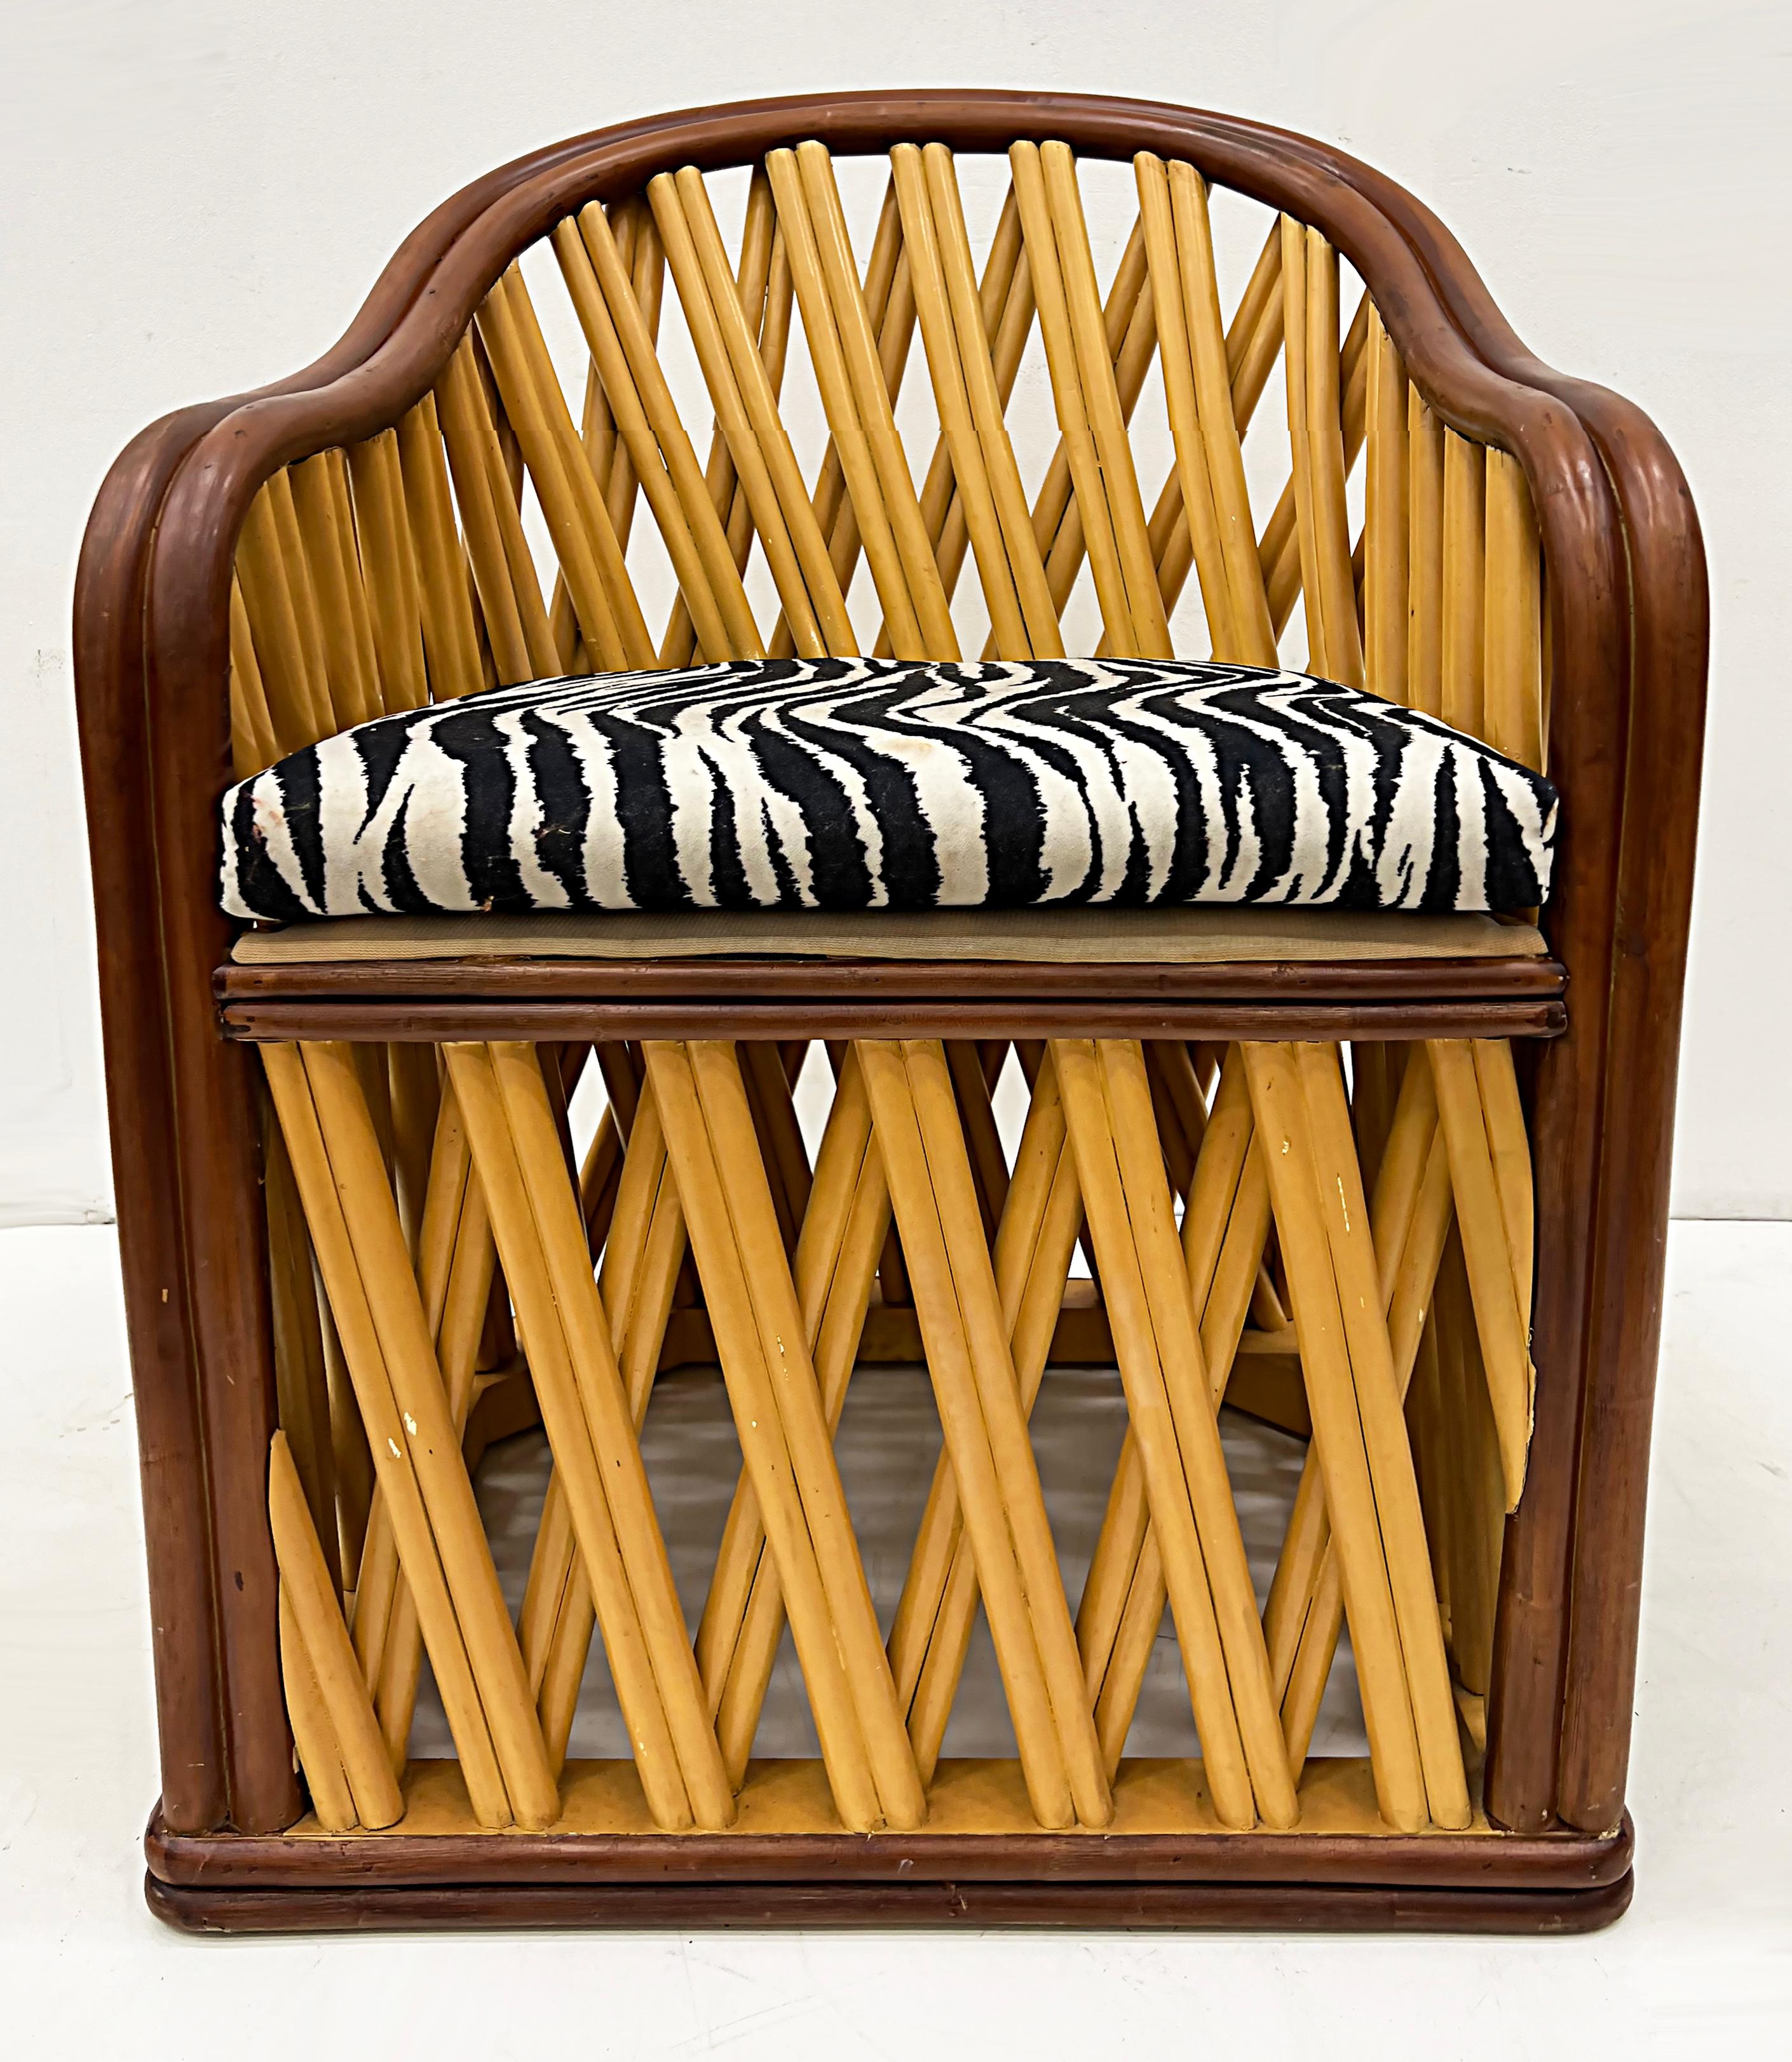 Vintage coastal tropical wooden accent chair with zebra print cushion.

Offered for sale is a Vintage coastal tropical accent chair with wooden dowels that have been bent and secured with a contrasting bent wood rail. The seat has a zebra print